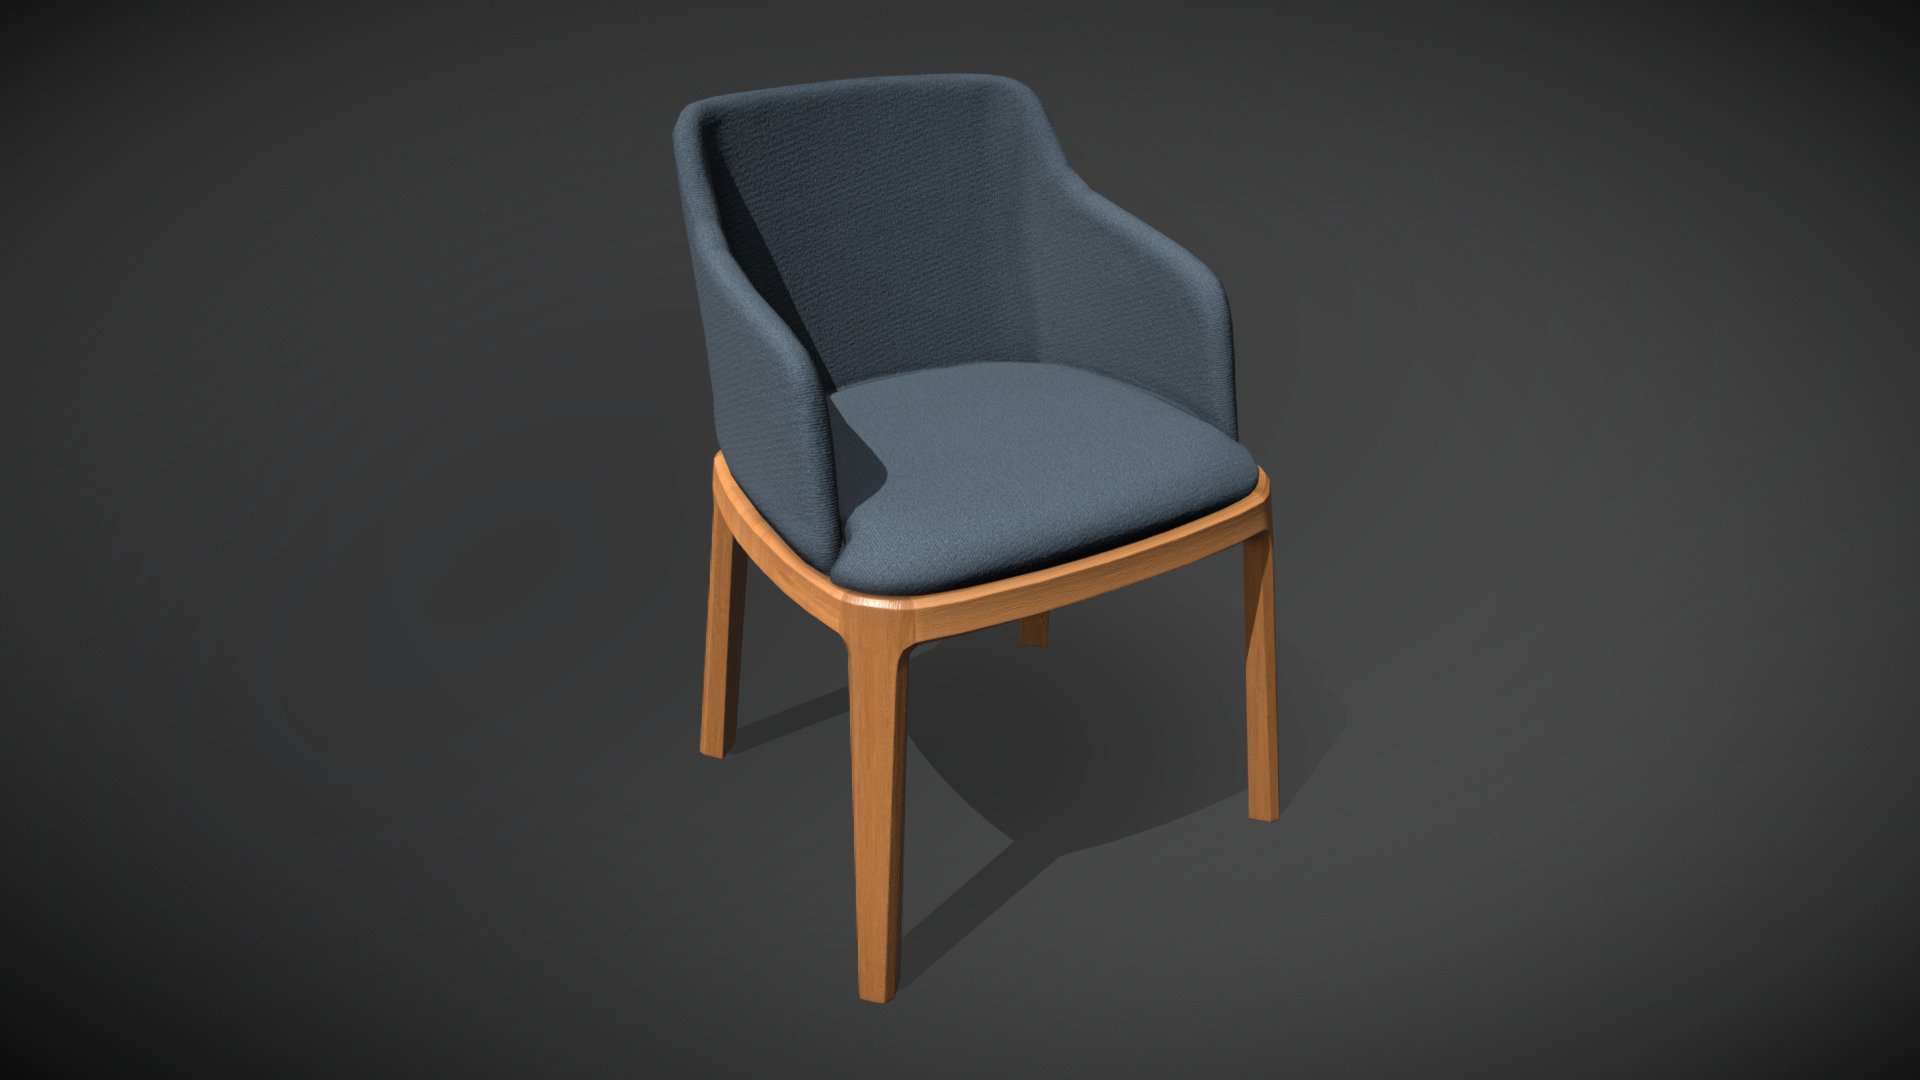 Chair with wood base and fabric seat. Home furniture 3d model